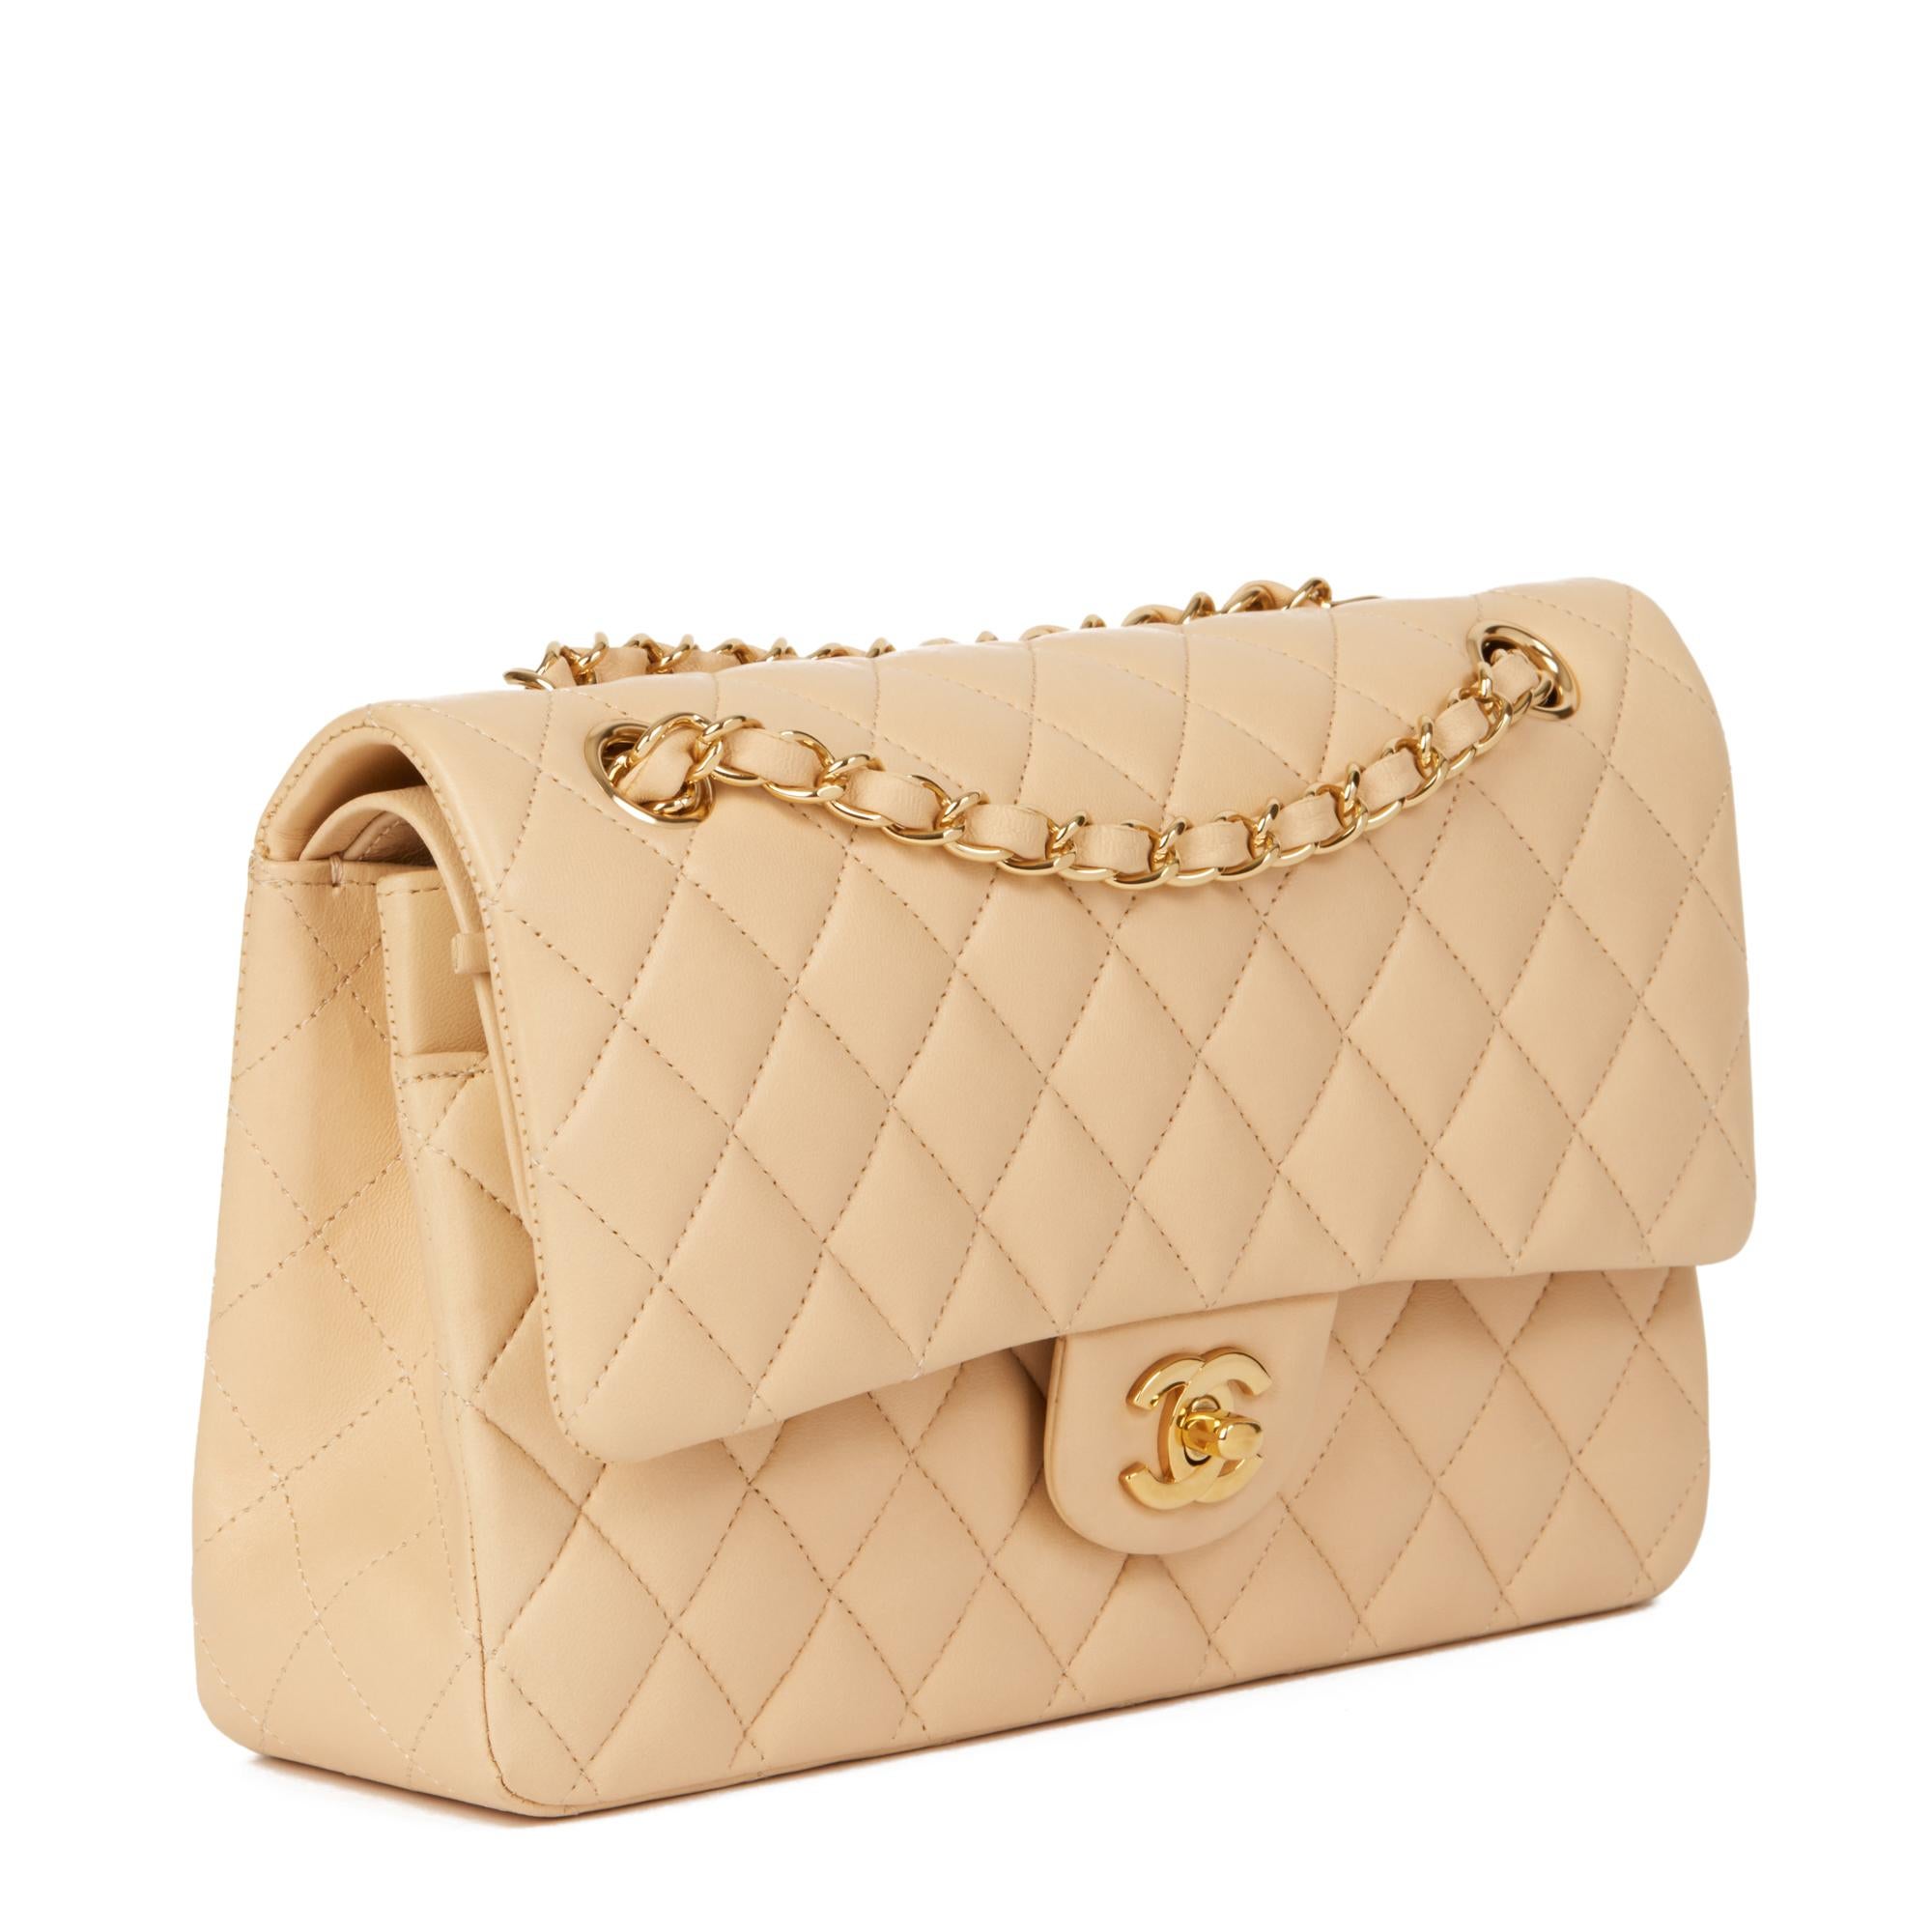 CHANEL
Beige Quilted Lambskin Medium Classic Double Flap Bag

Xupes Reference: HB4518
Serial Number: 17373497
Age (Circa): 2013
Accompanied By: Chanel Dust Bag, Authenticity Card
Authenticity Details: Authenticity Card, Serial Sticker (Made in